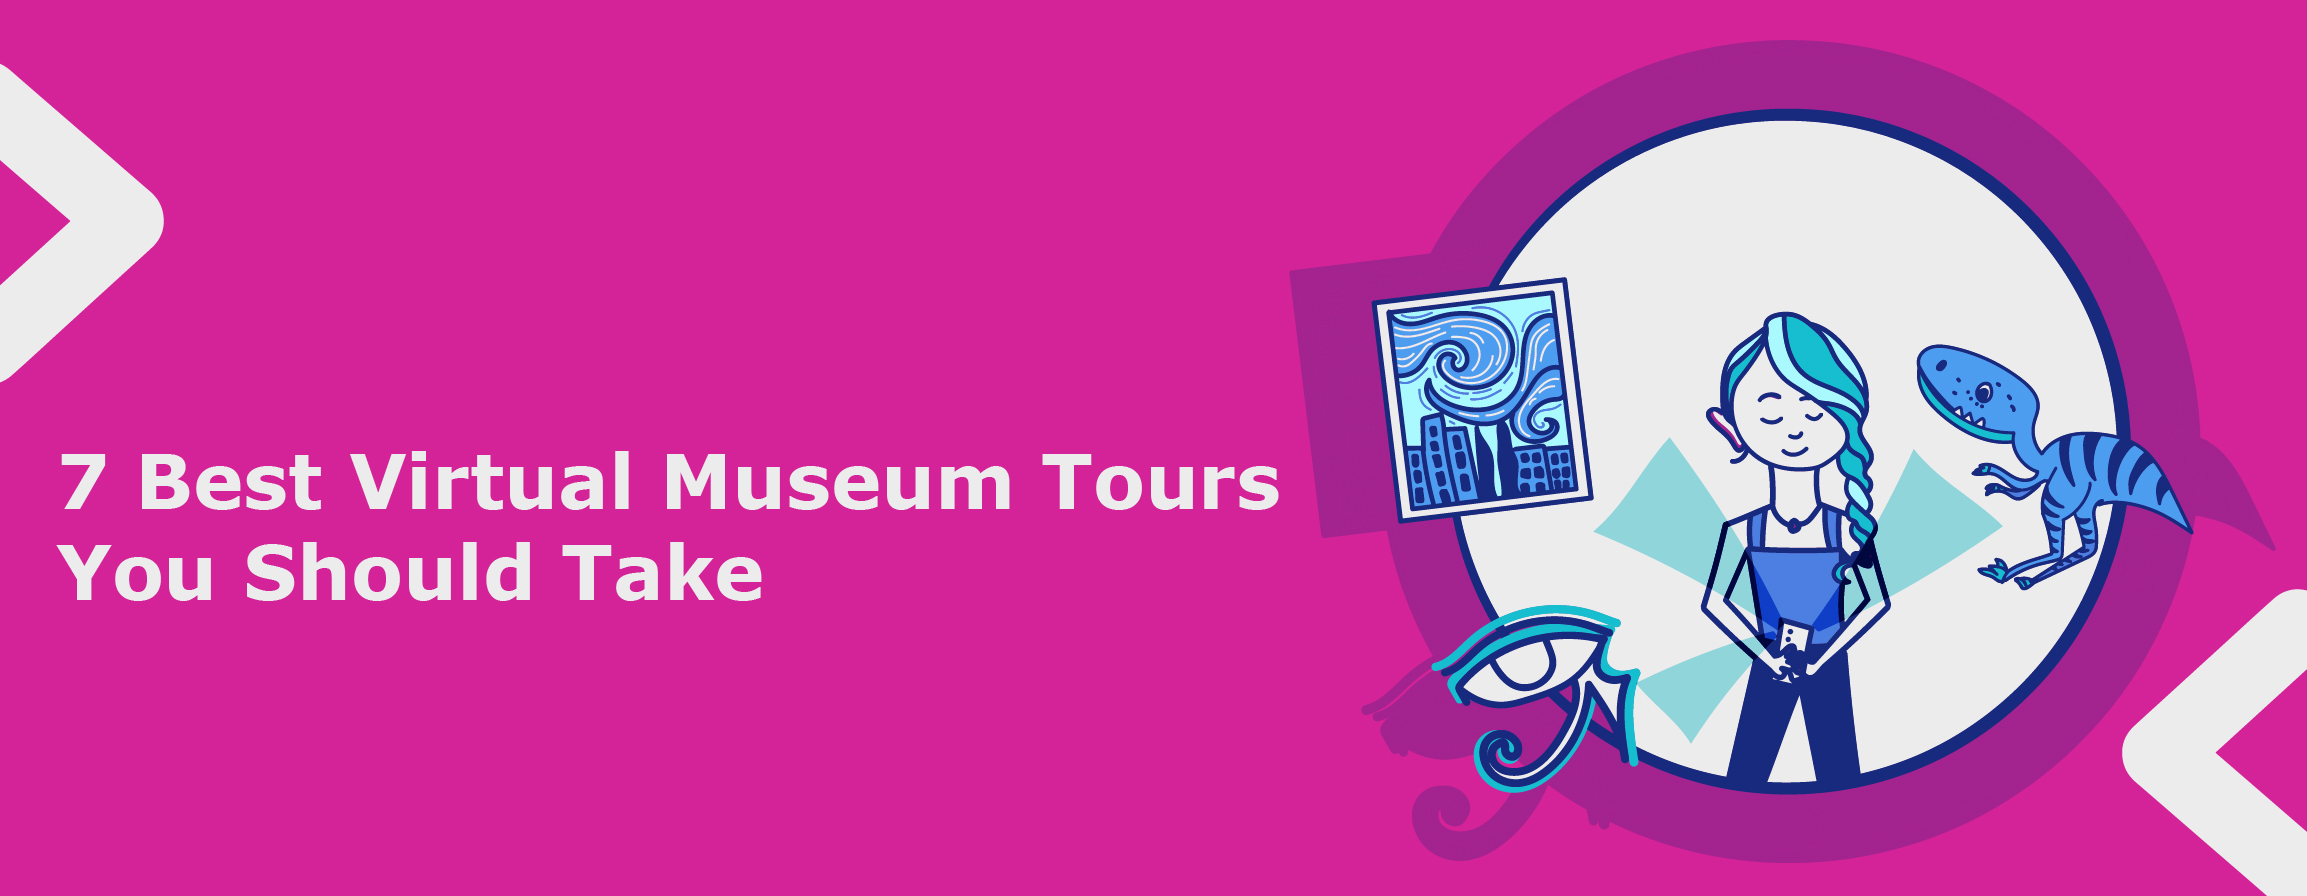 7 Best Virtual Museum Tours You Should Take